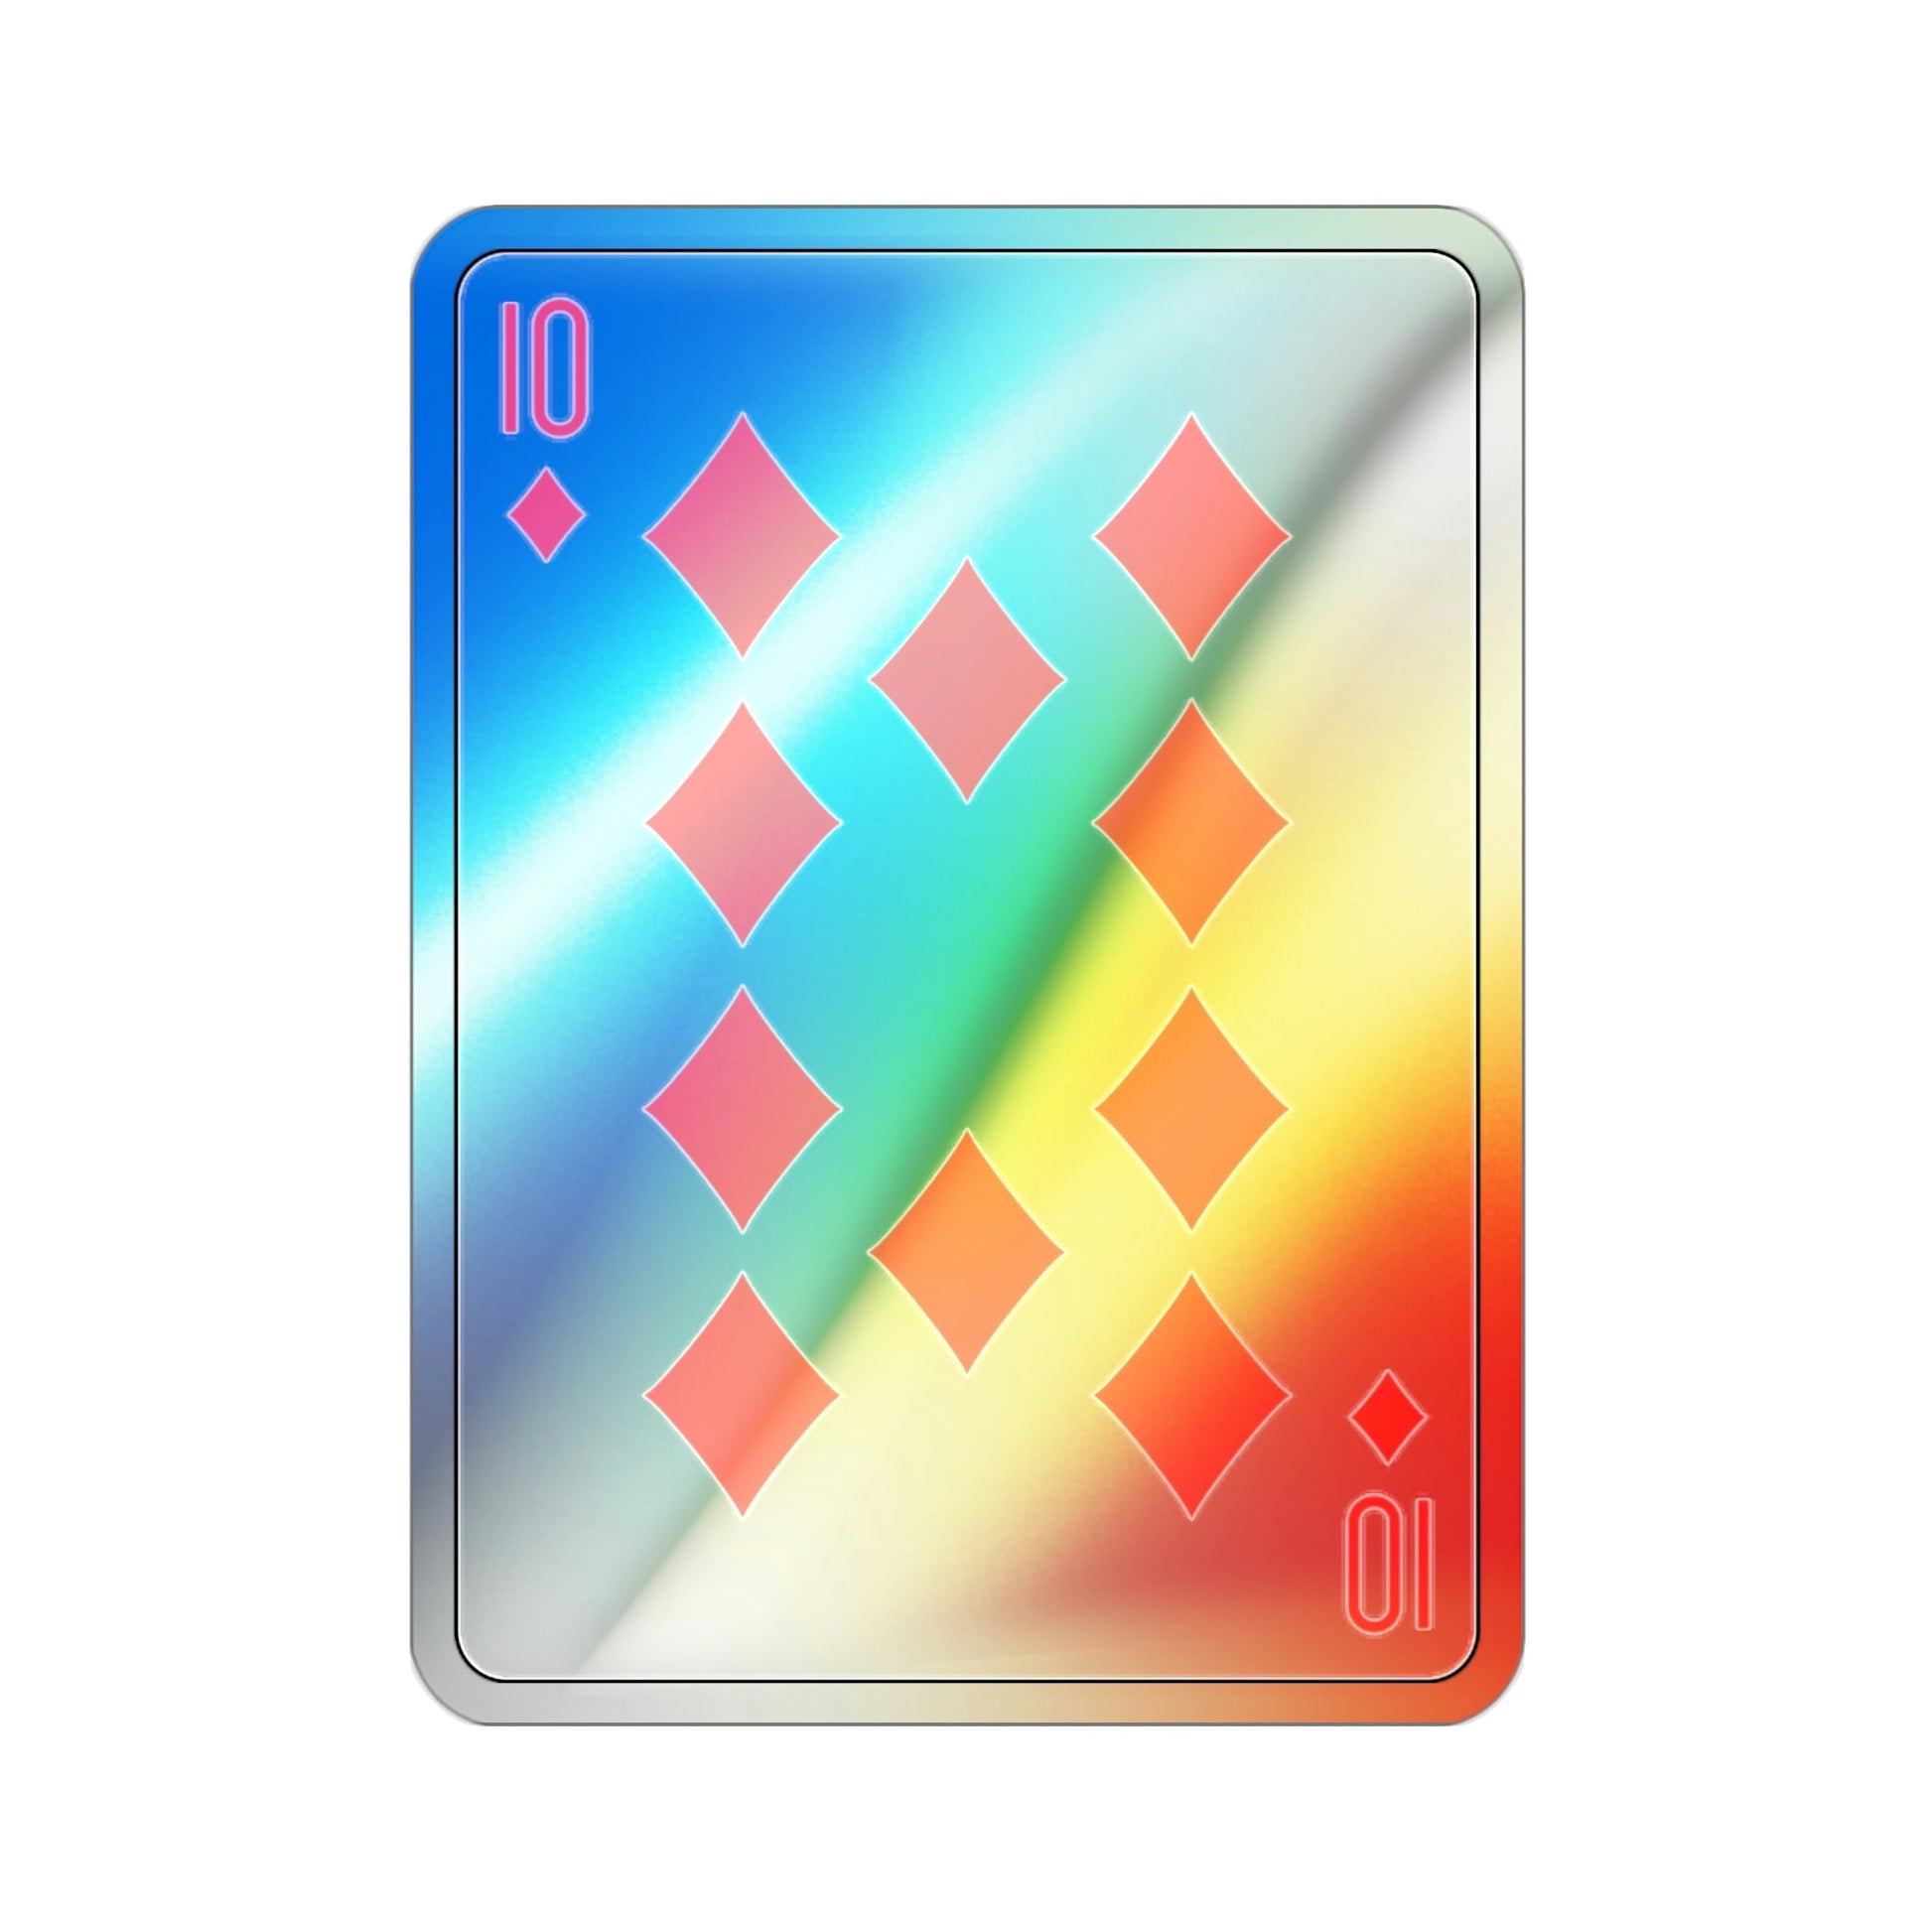 10 of Diamonds Playing Card Holographic STICKER Die-Cut Vinyl Decal-2 Inch-The Sticker Space